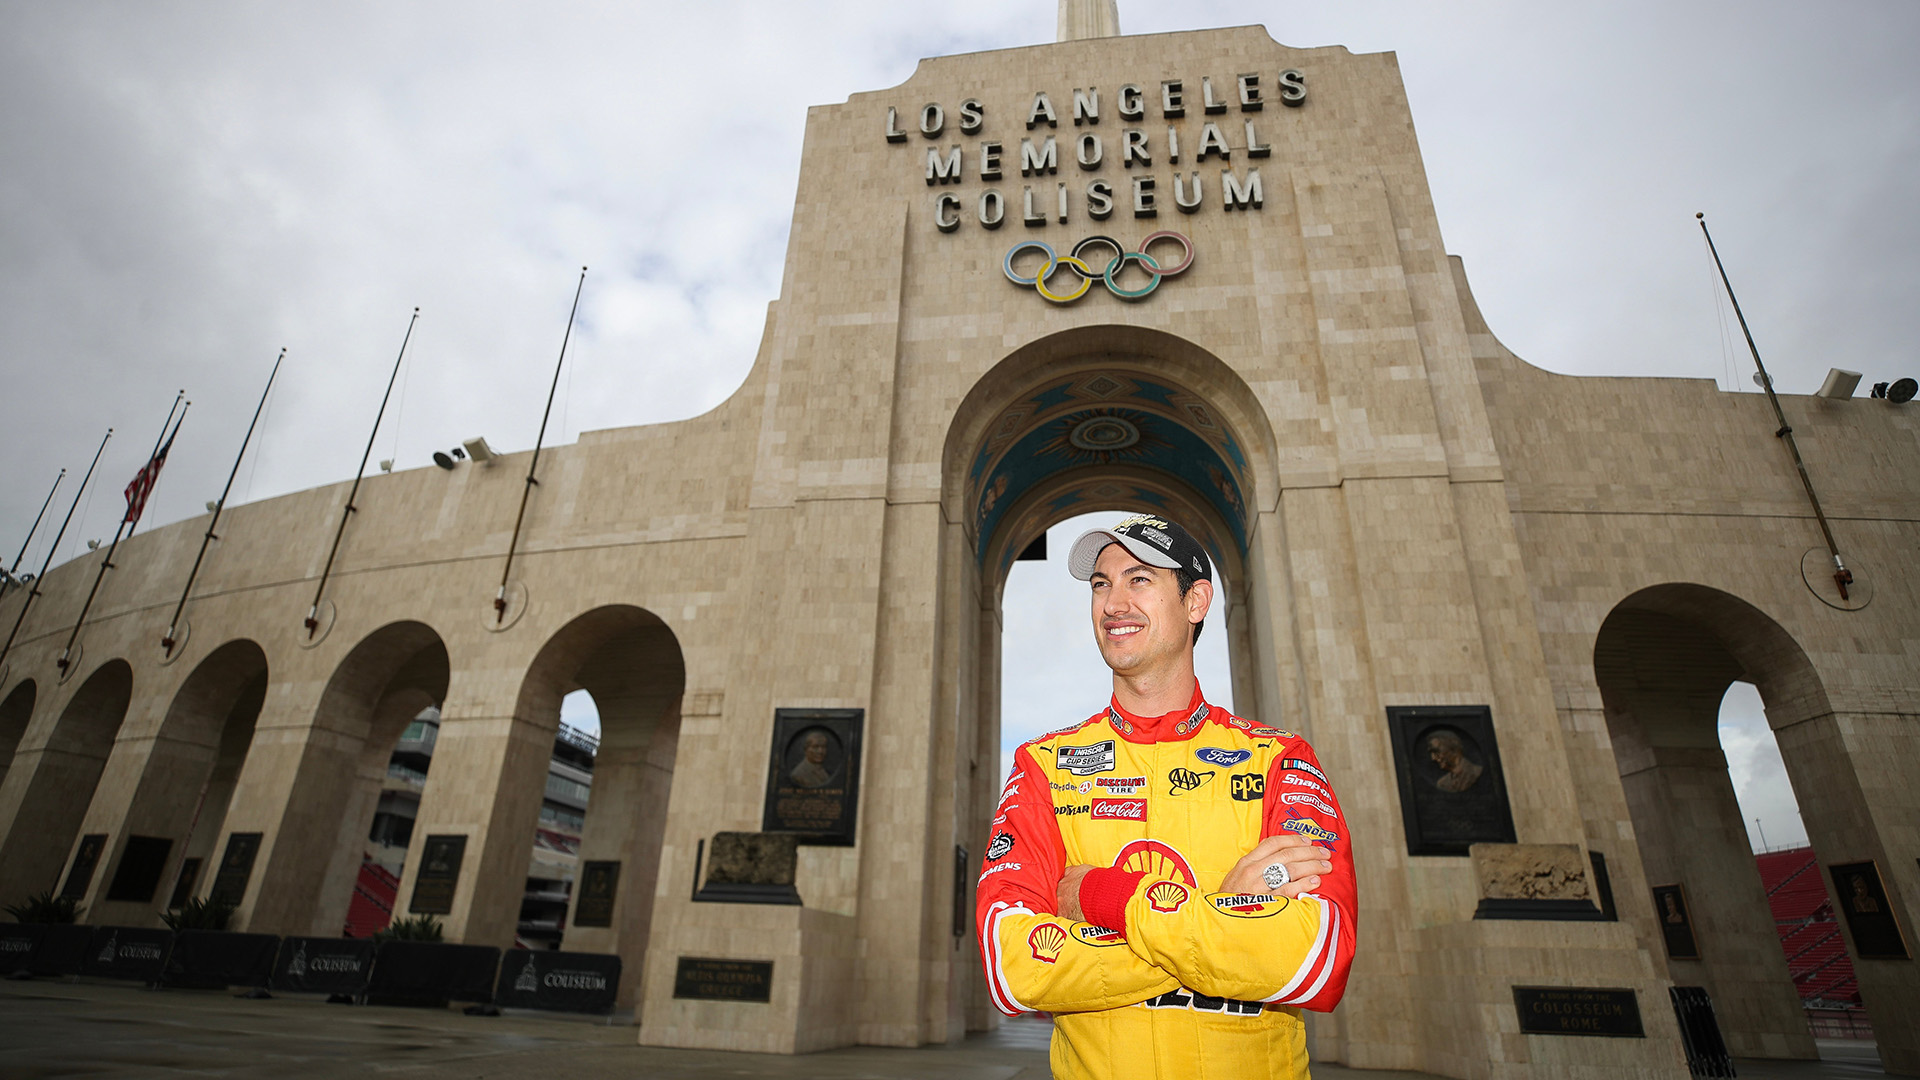 Joey Logano, driver of the #22 Shell Pennzoil Ford, poses at LA Memorial Coliseum on November 08, 2022 in Los Angeles, California.